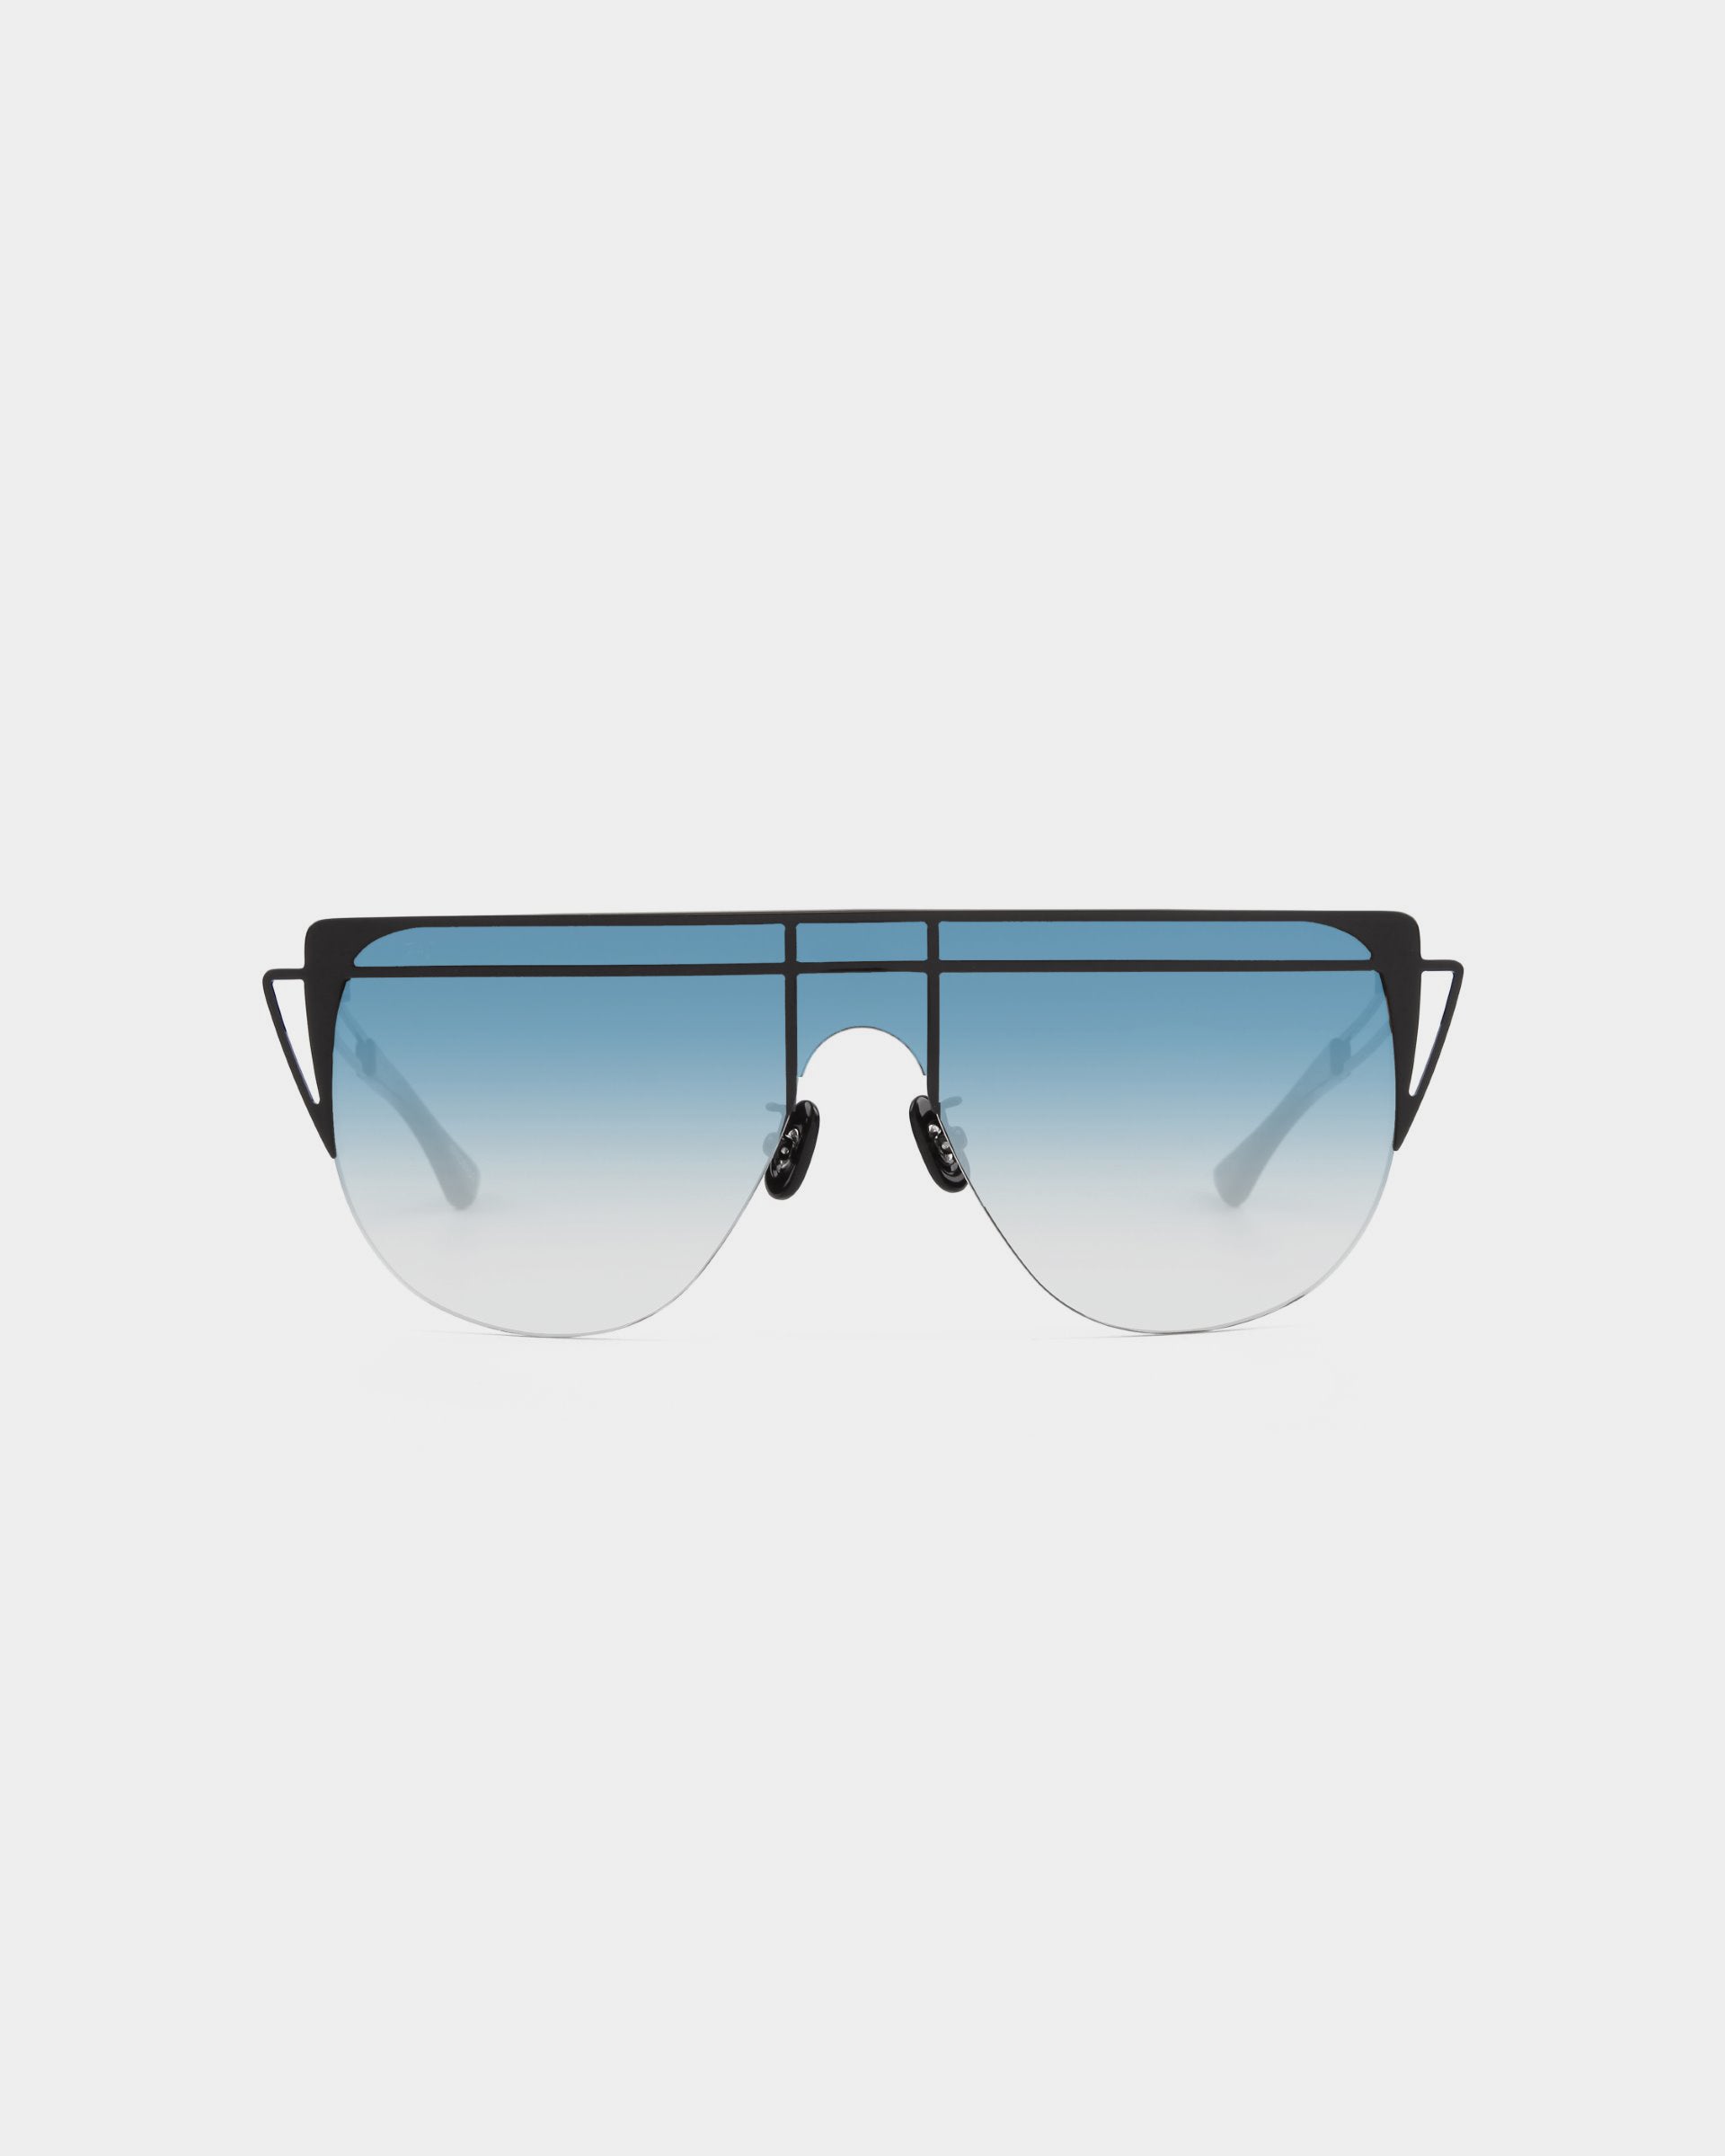 A pair of **Alien** sunglasses by **For Art&#39;s Sake®** with gradient blue tint lenses and a thin black frame. The design features a straight top bar and minimalist, sleek lines, giving them a modern and trendy appearance. The nose pads are adjustable for a comfortable fit, offering UV protection.